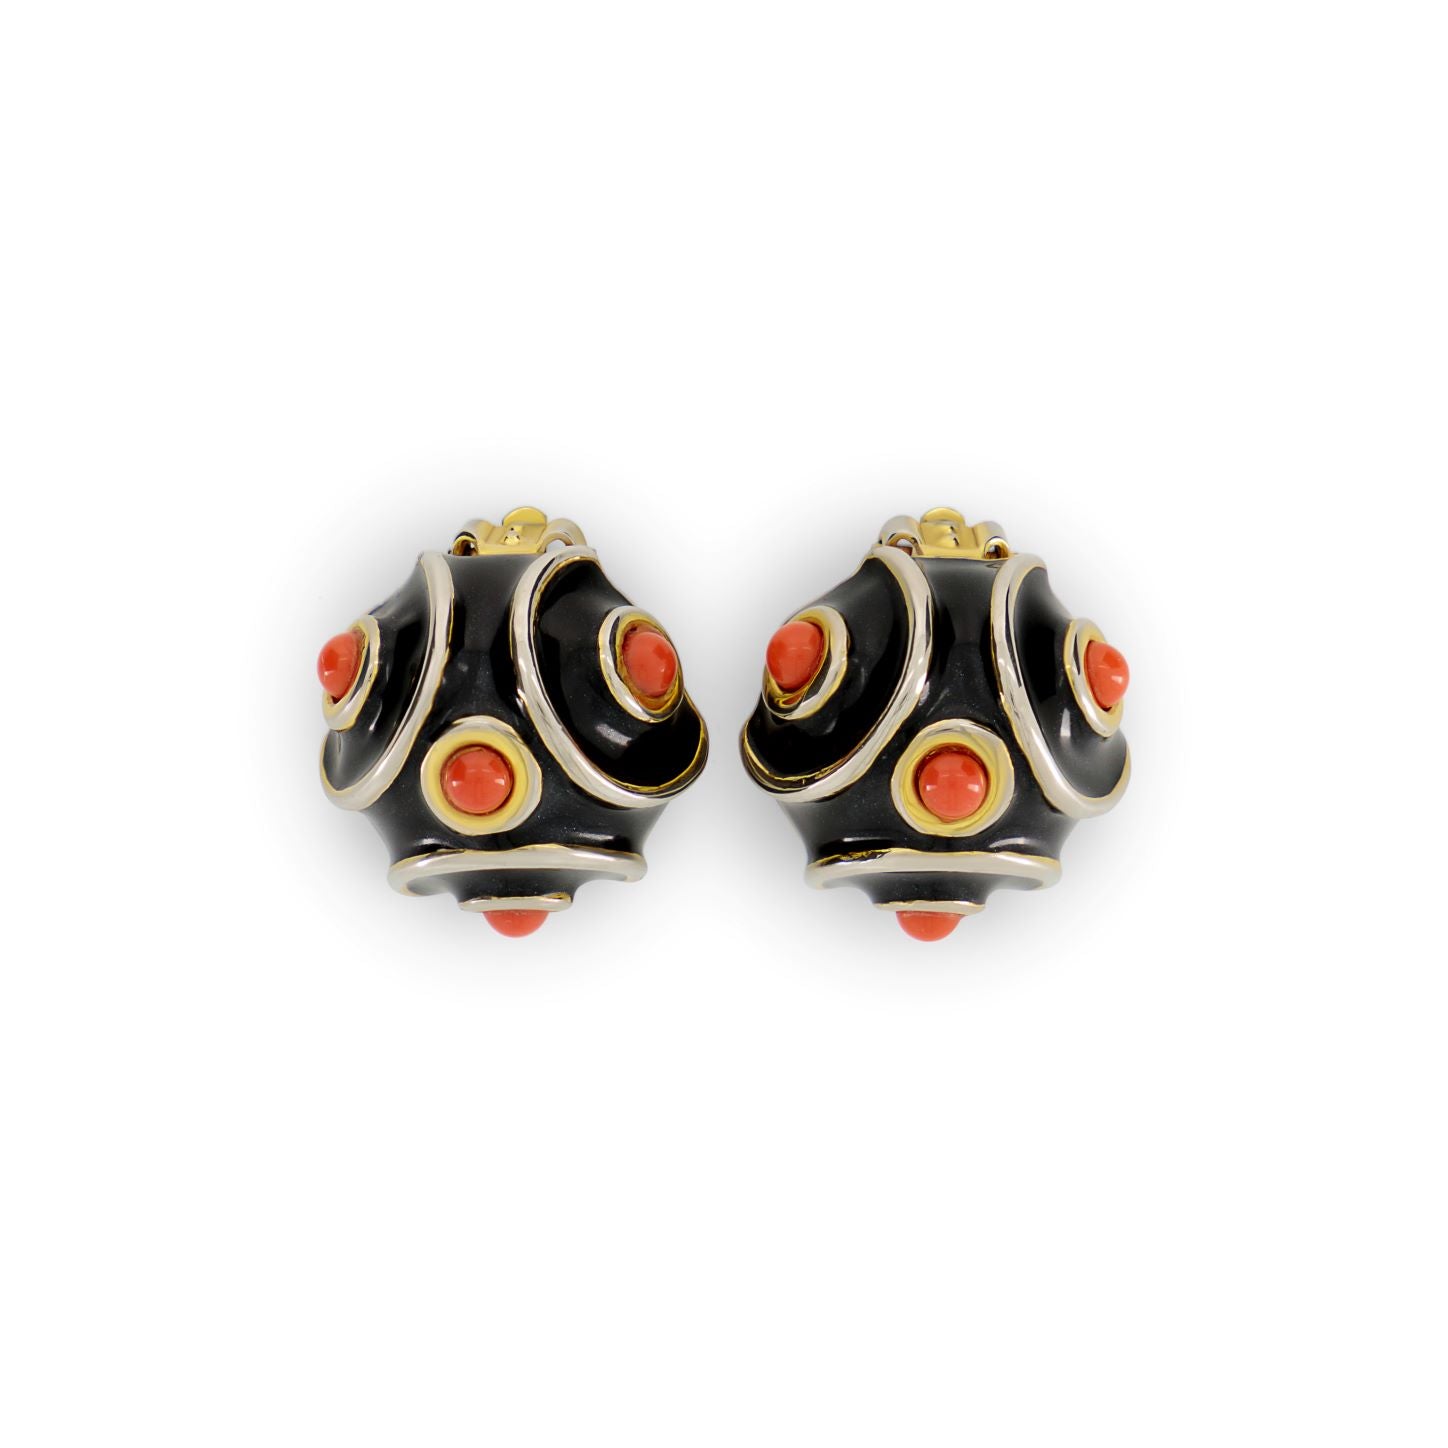 Vintage Kenneth Jay Lane colourful earrings in gold-plated metal with black and orange enamel. 